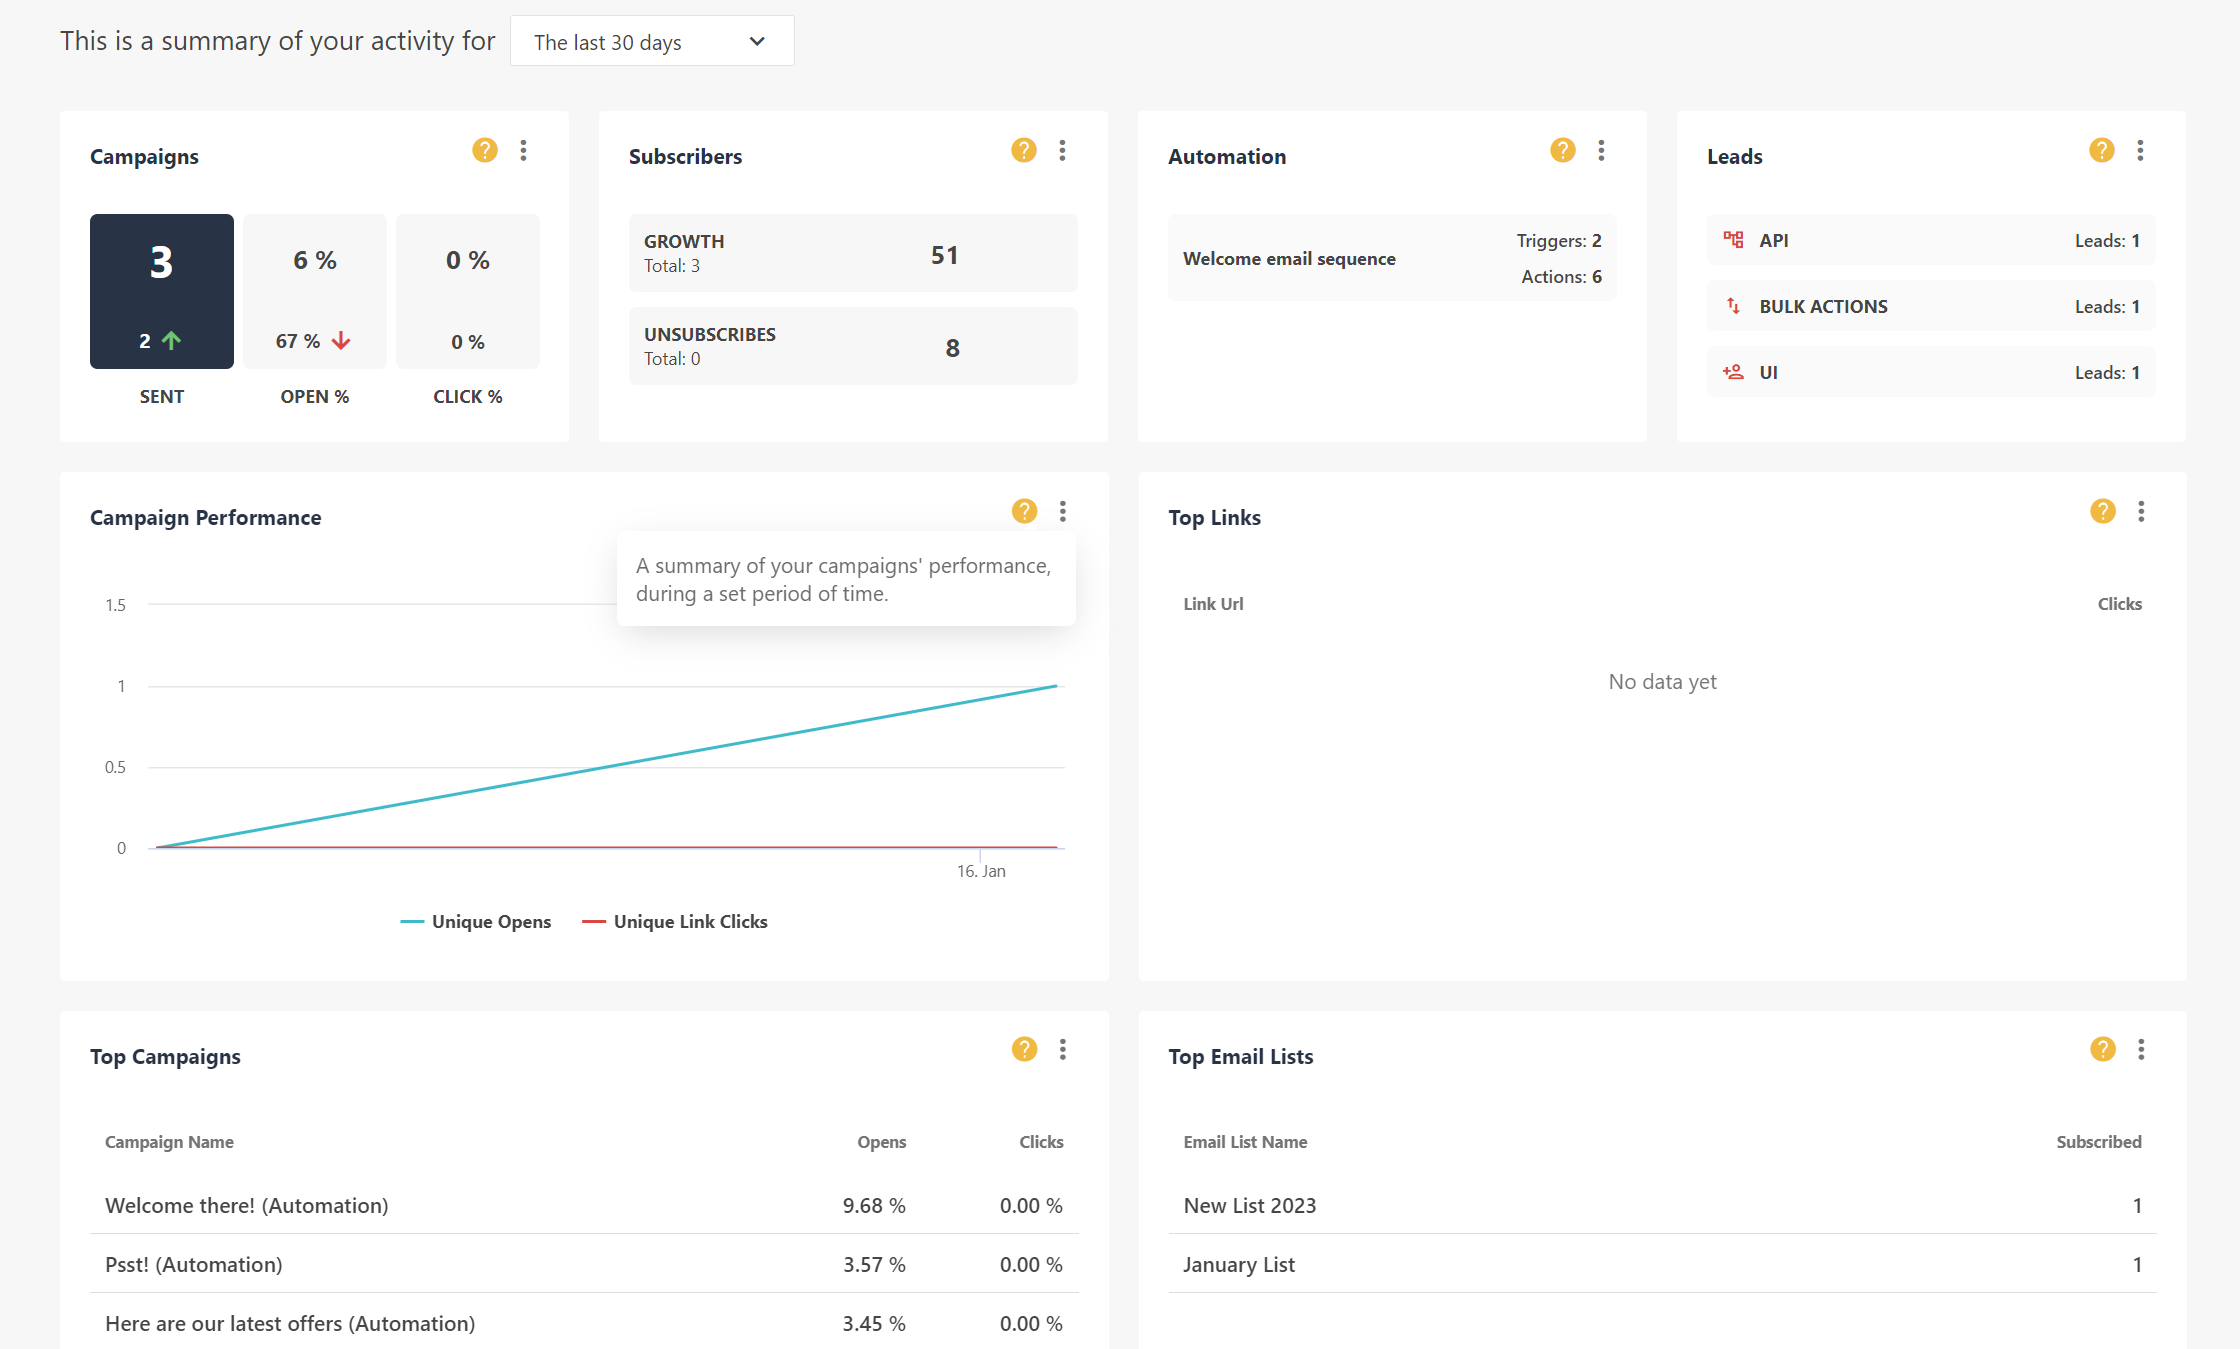 Campaigns summary in the main dashboard